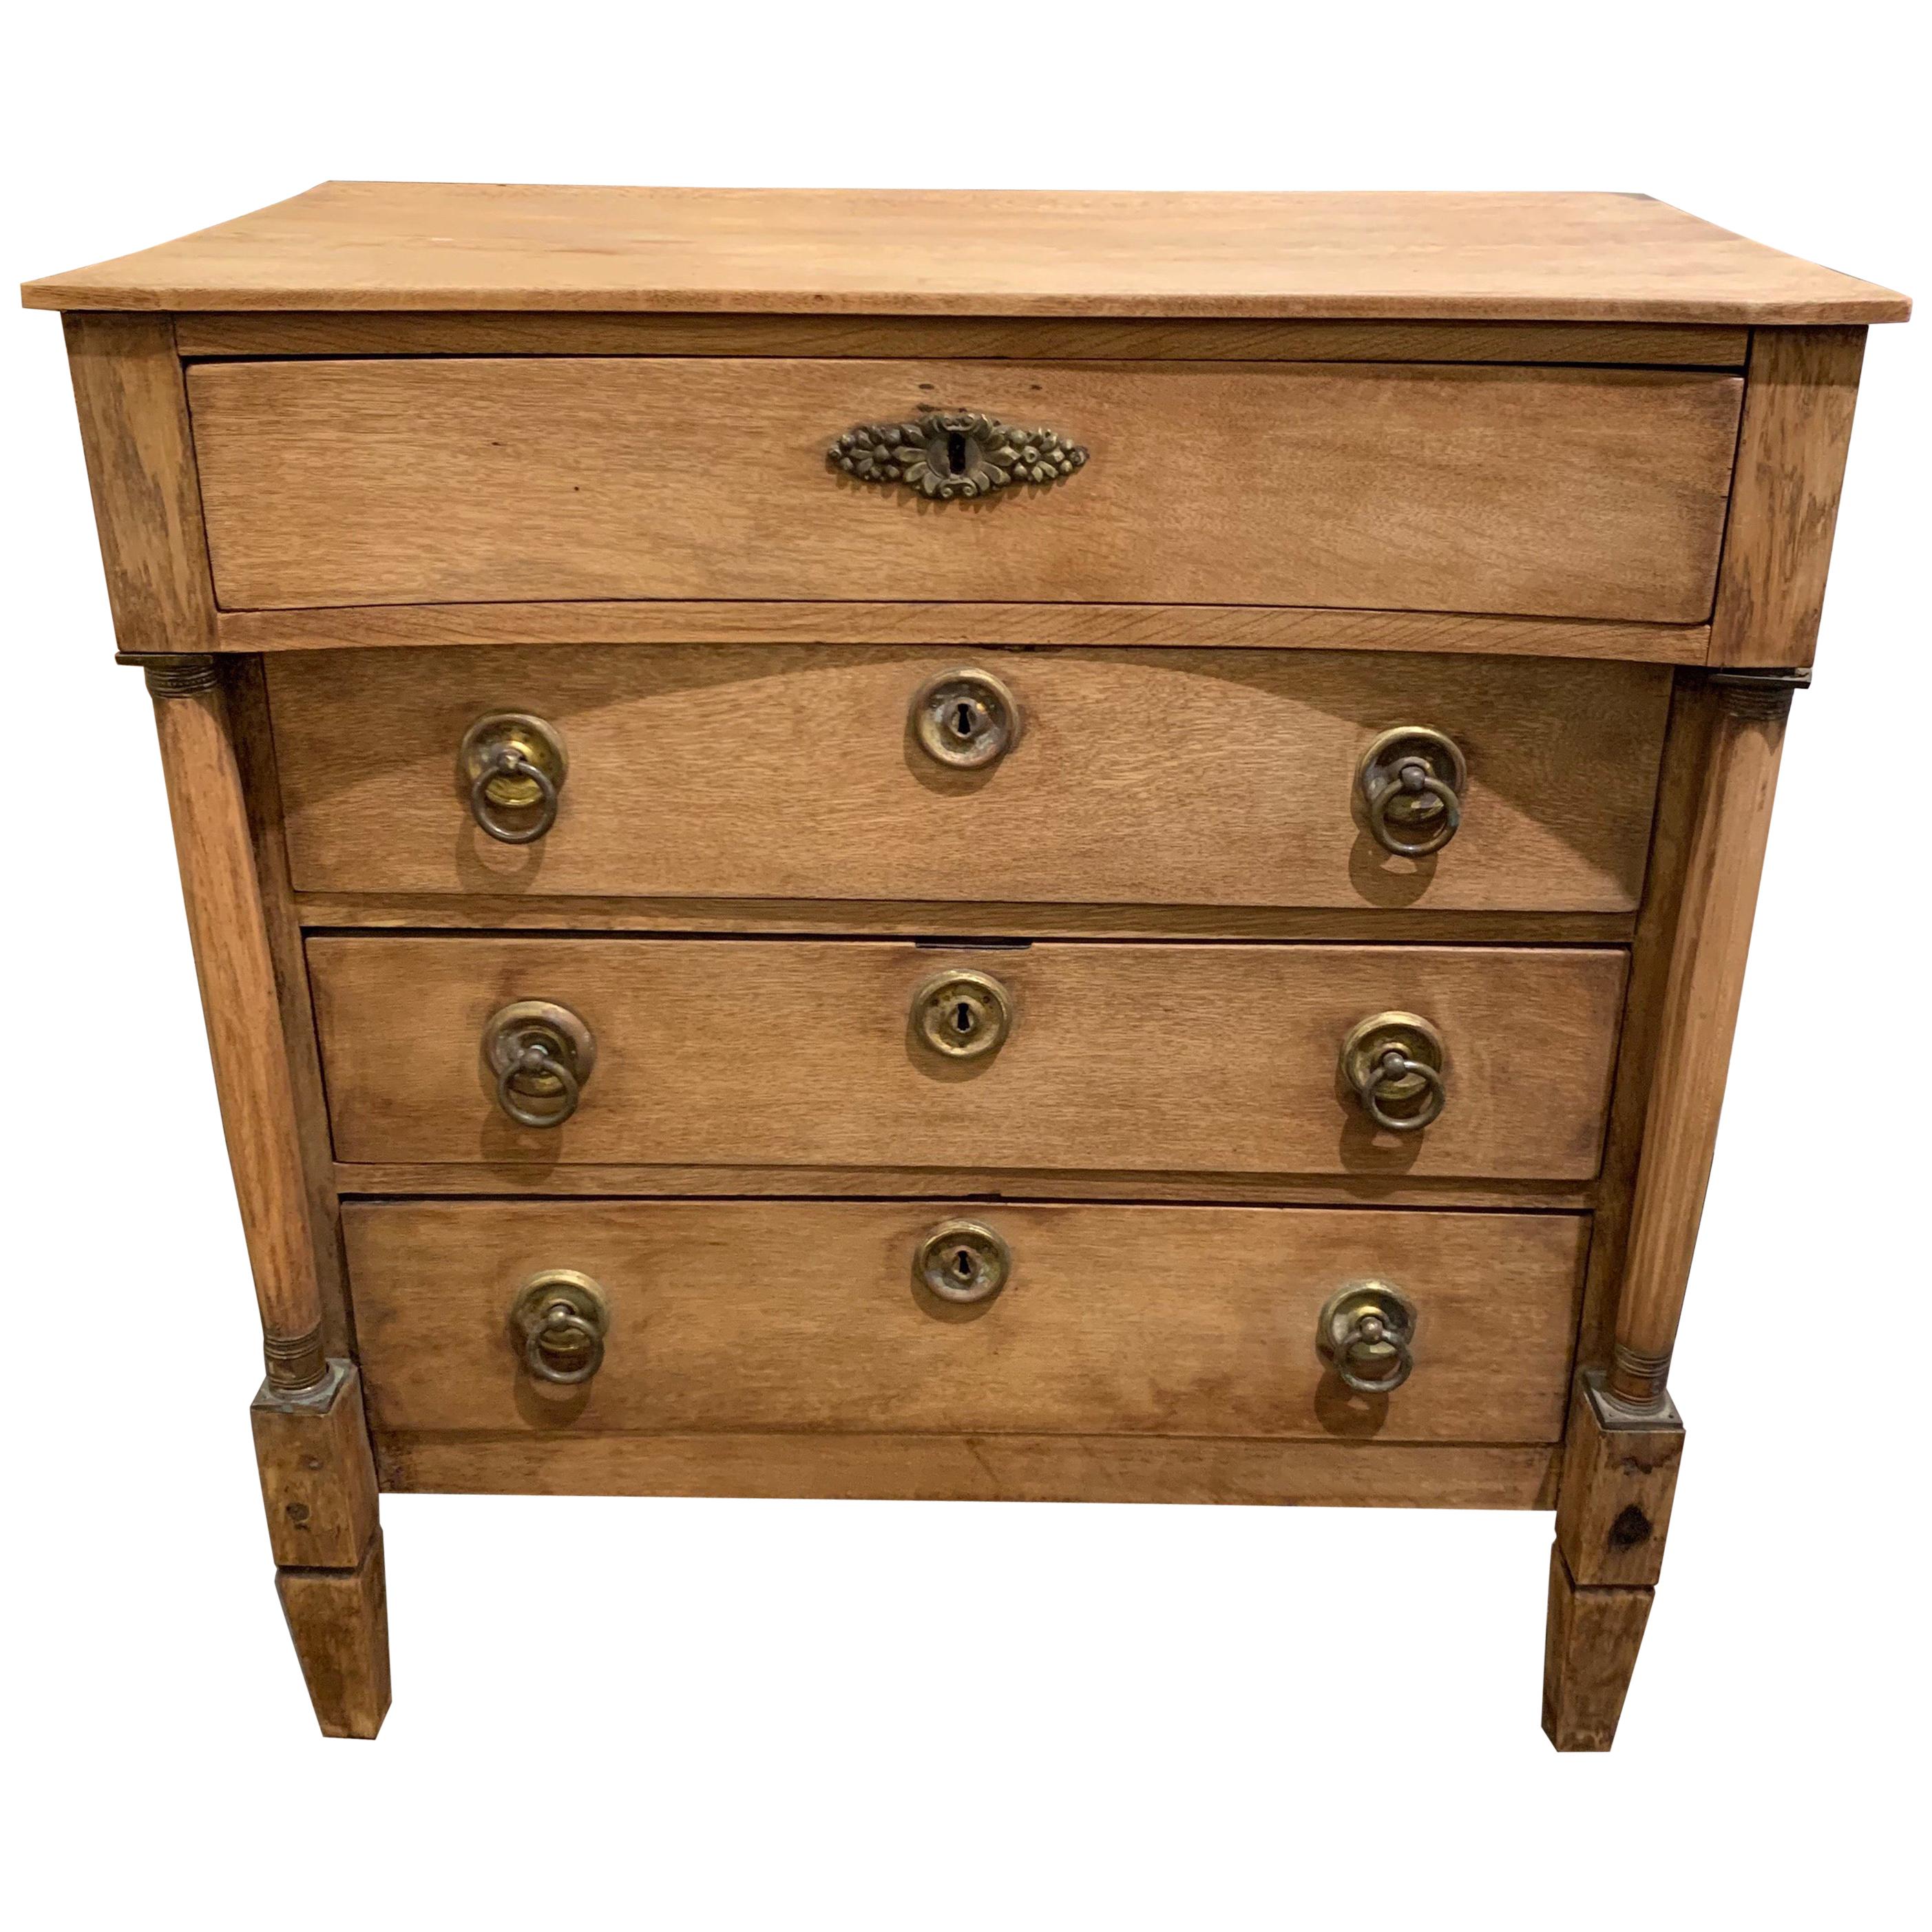 19th Century French Bleached Oak Empire Style Chest of Drawers